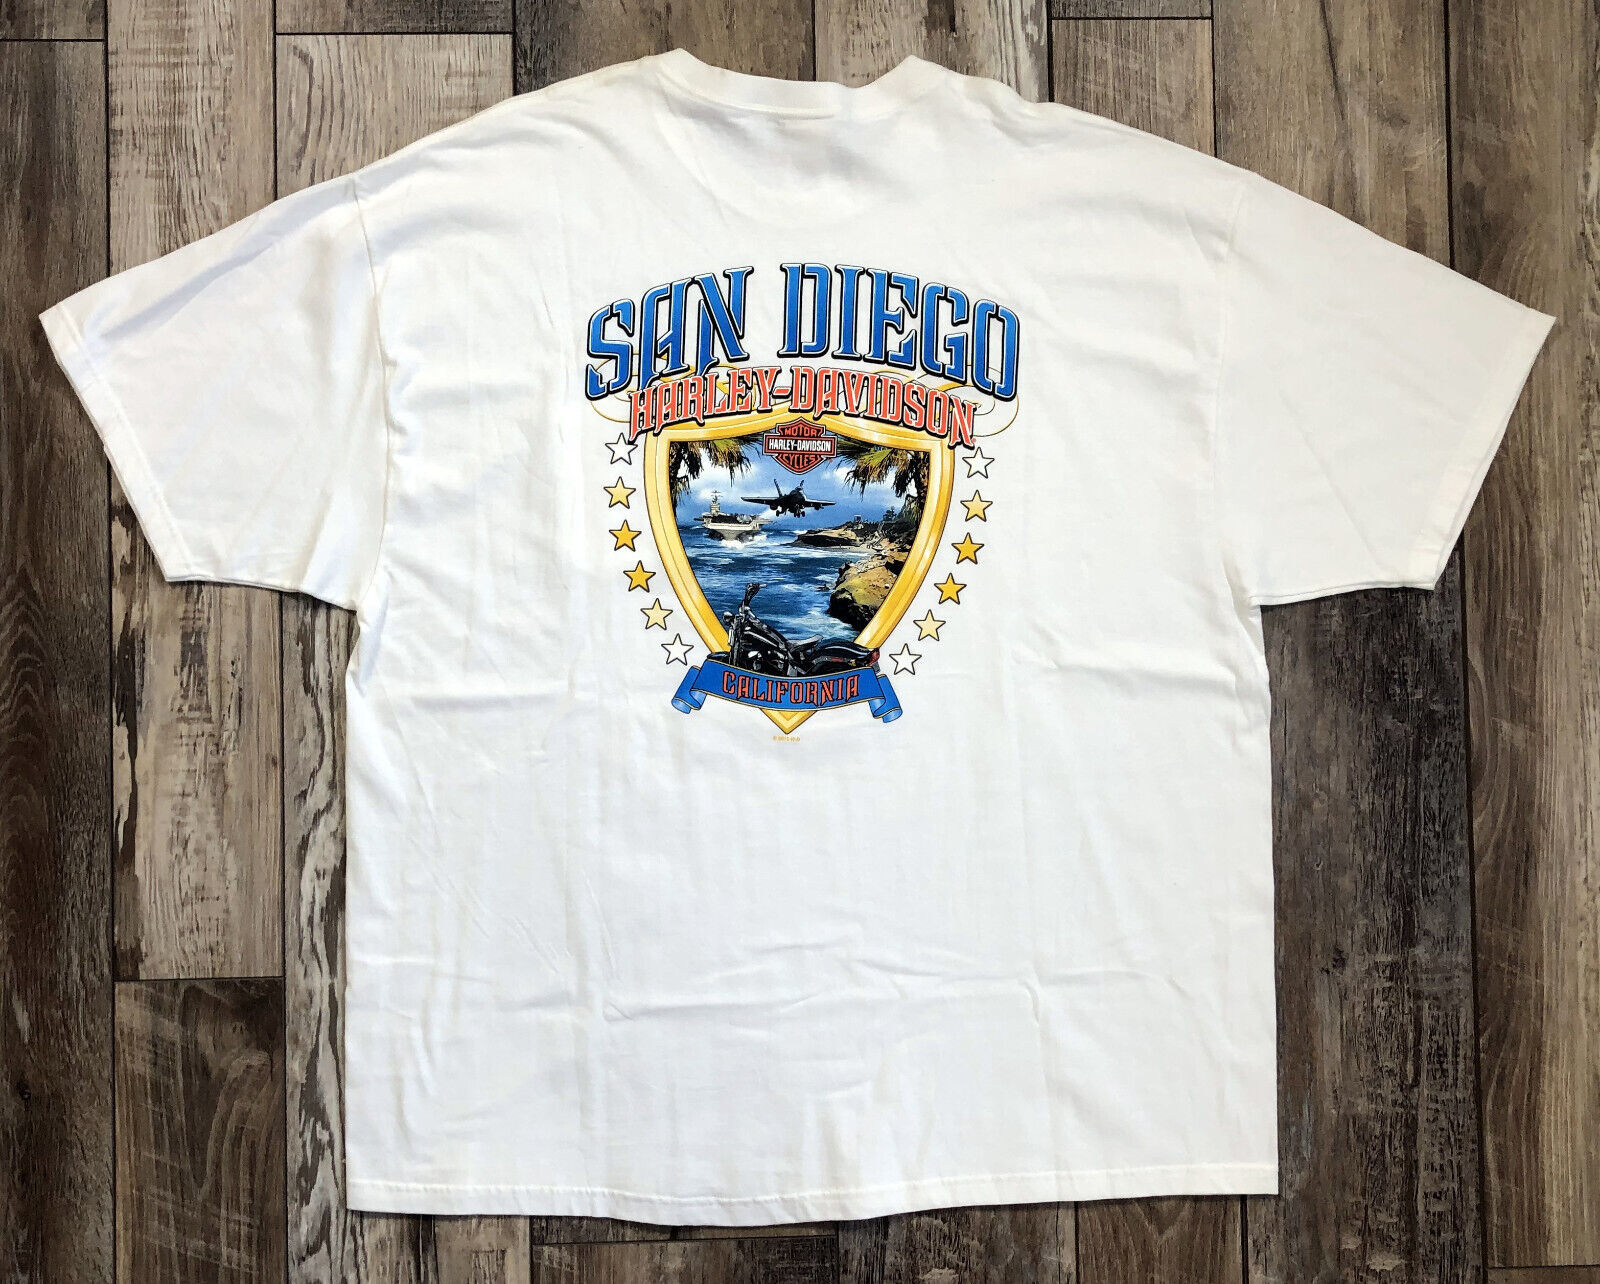 Primary image for Harley-Davidson T-Shirt San Diego CA White Beach Plane Aircraft Carrier Size 3XL